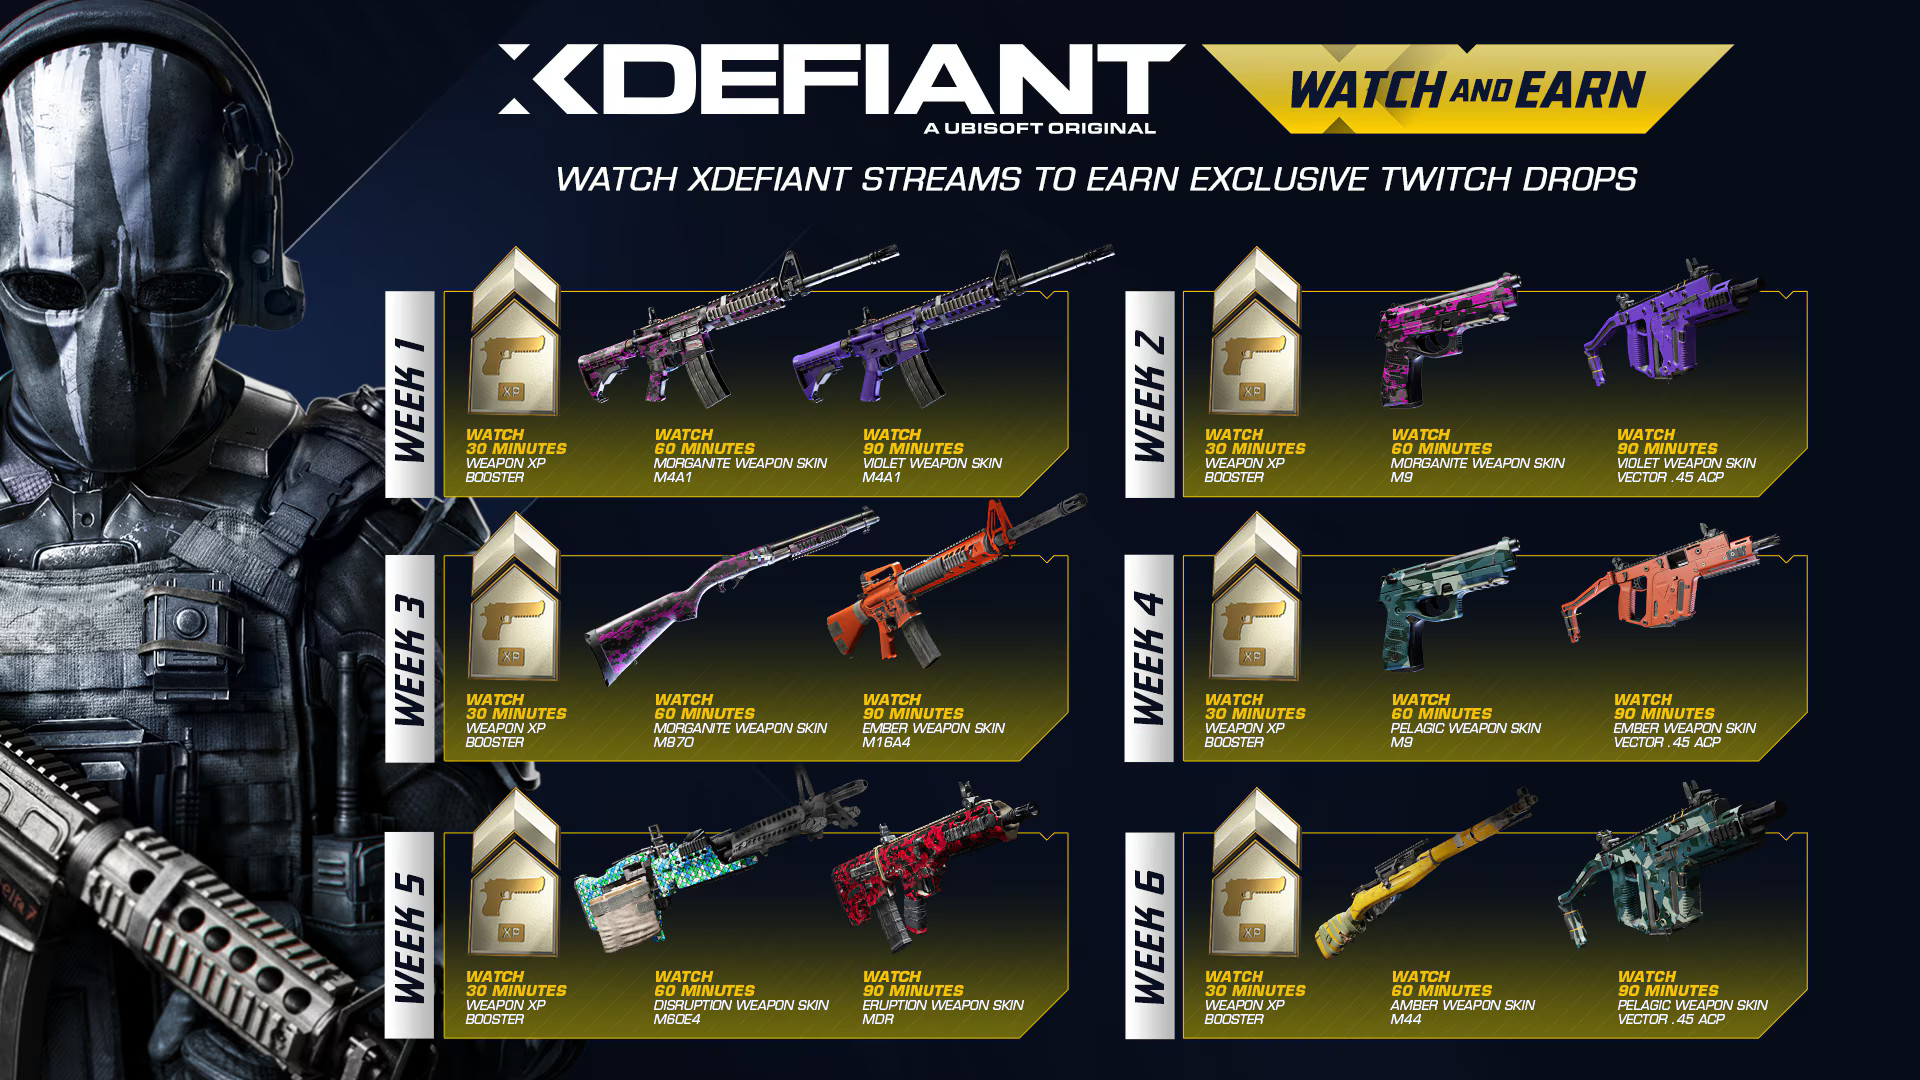 The graphic for XDefiant twitch drops.